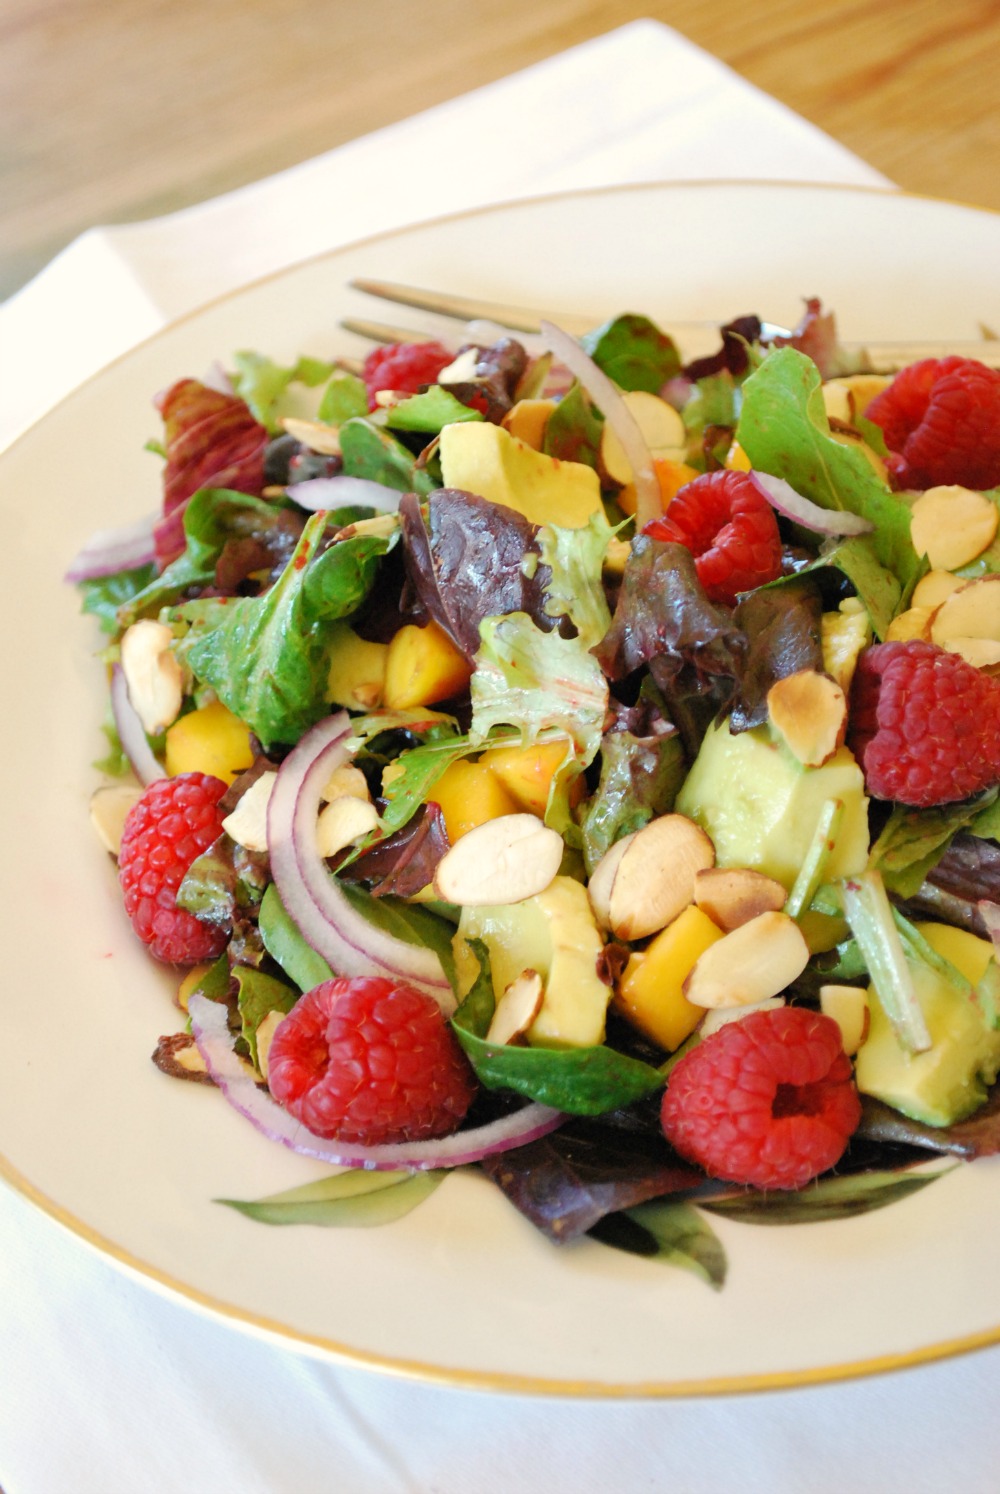 Raspberry, Avocado & Mango Salad, with mixed greens, red onion and almonds